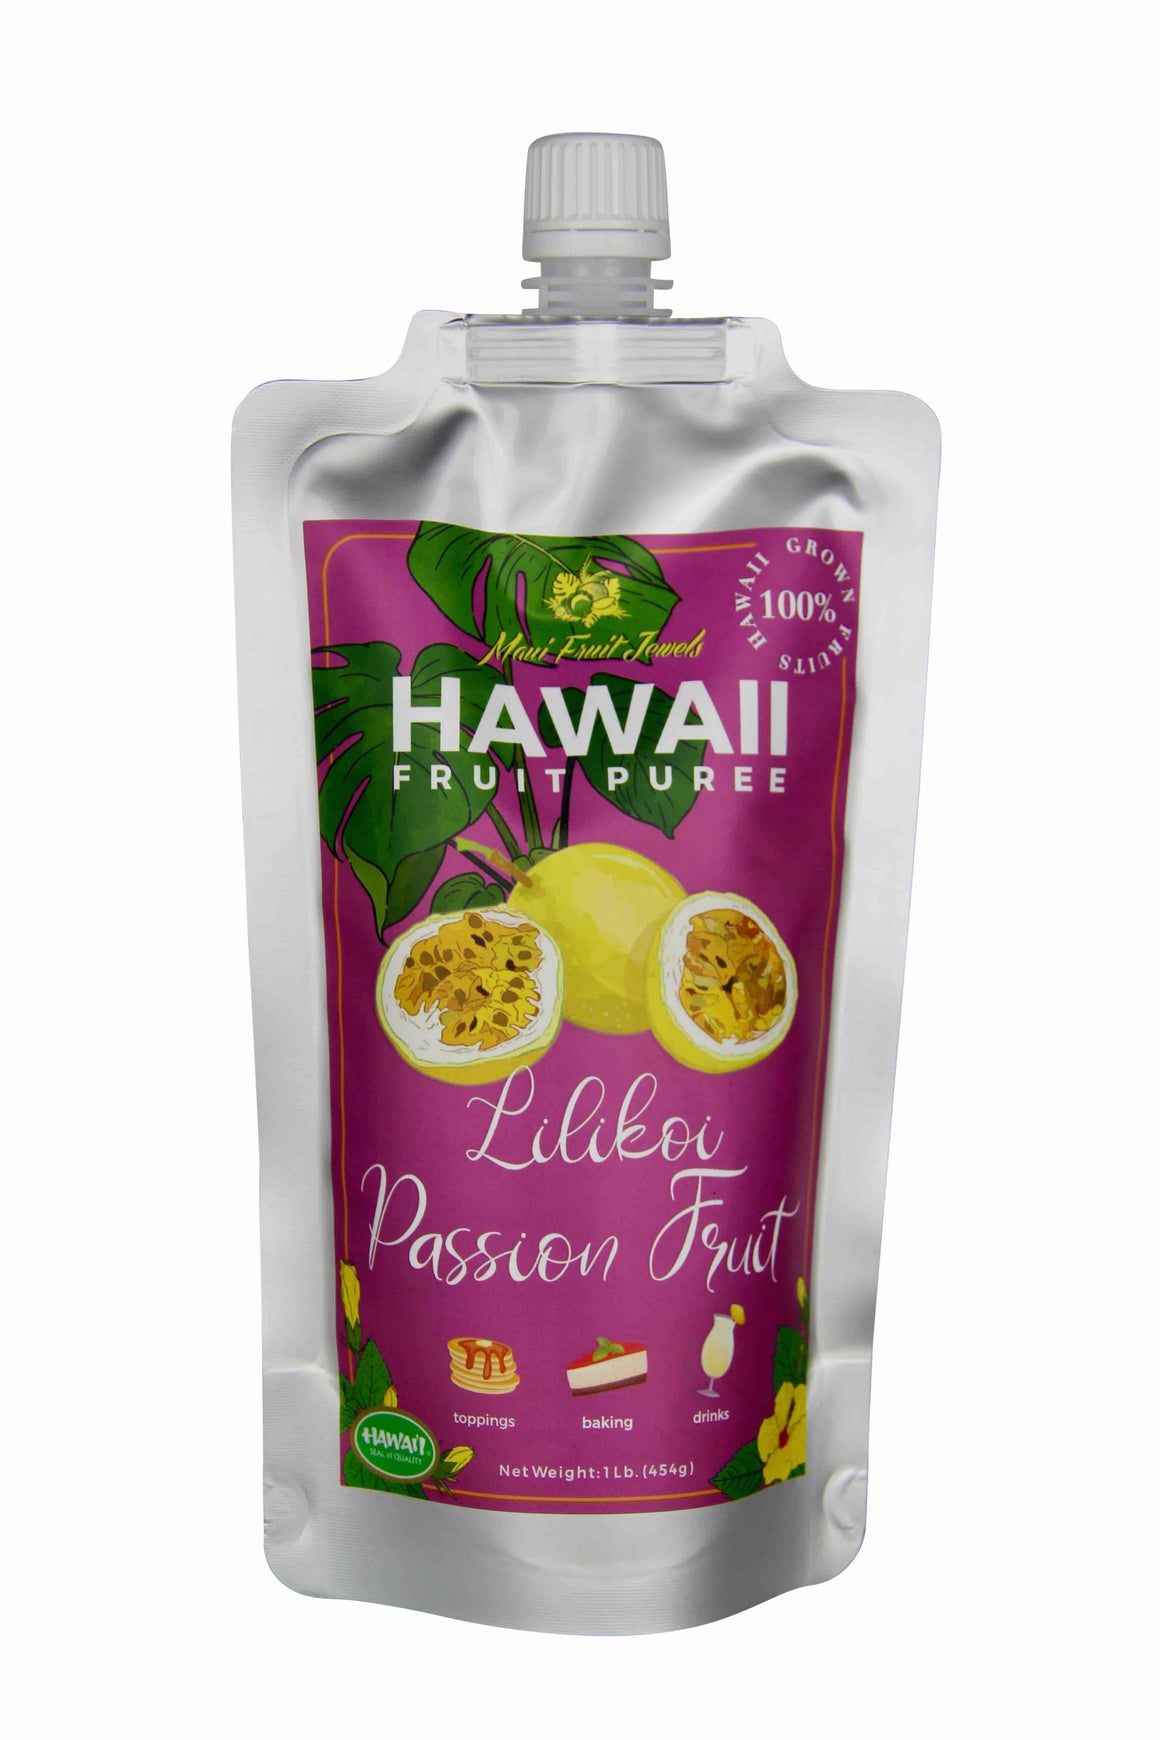 Hawaii Lilikoi Passion Fruit Puree (only available on this website)